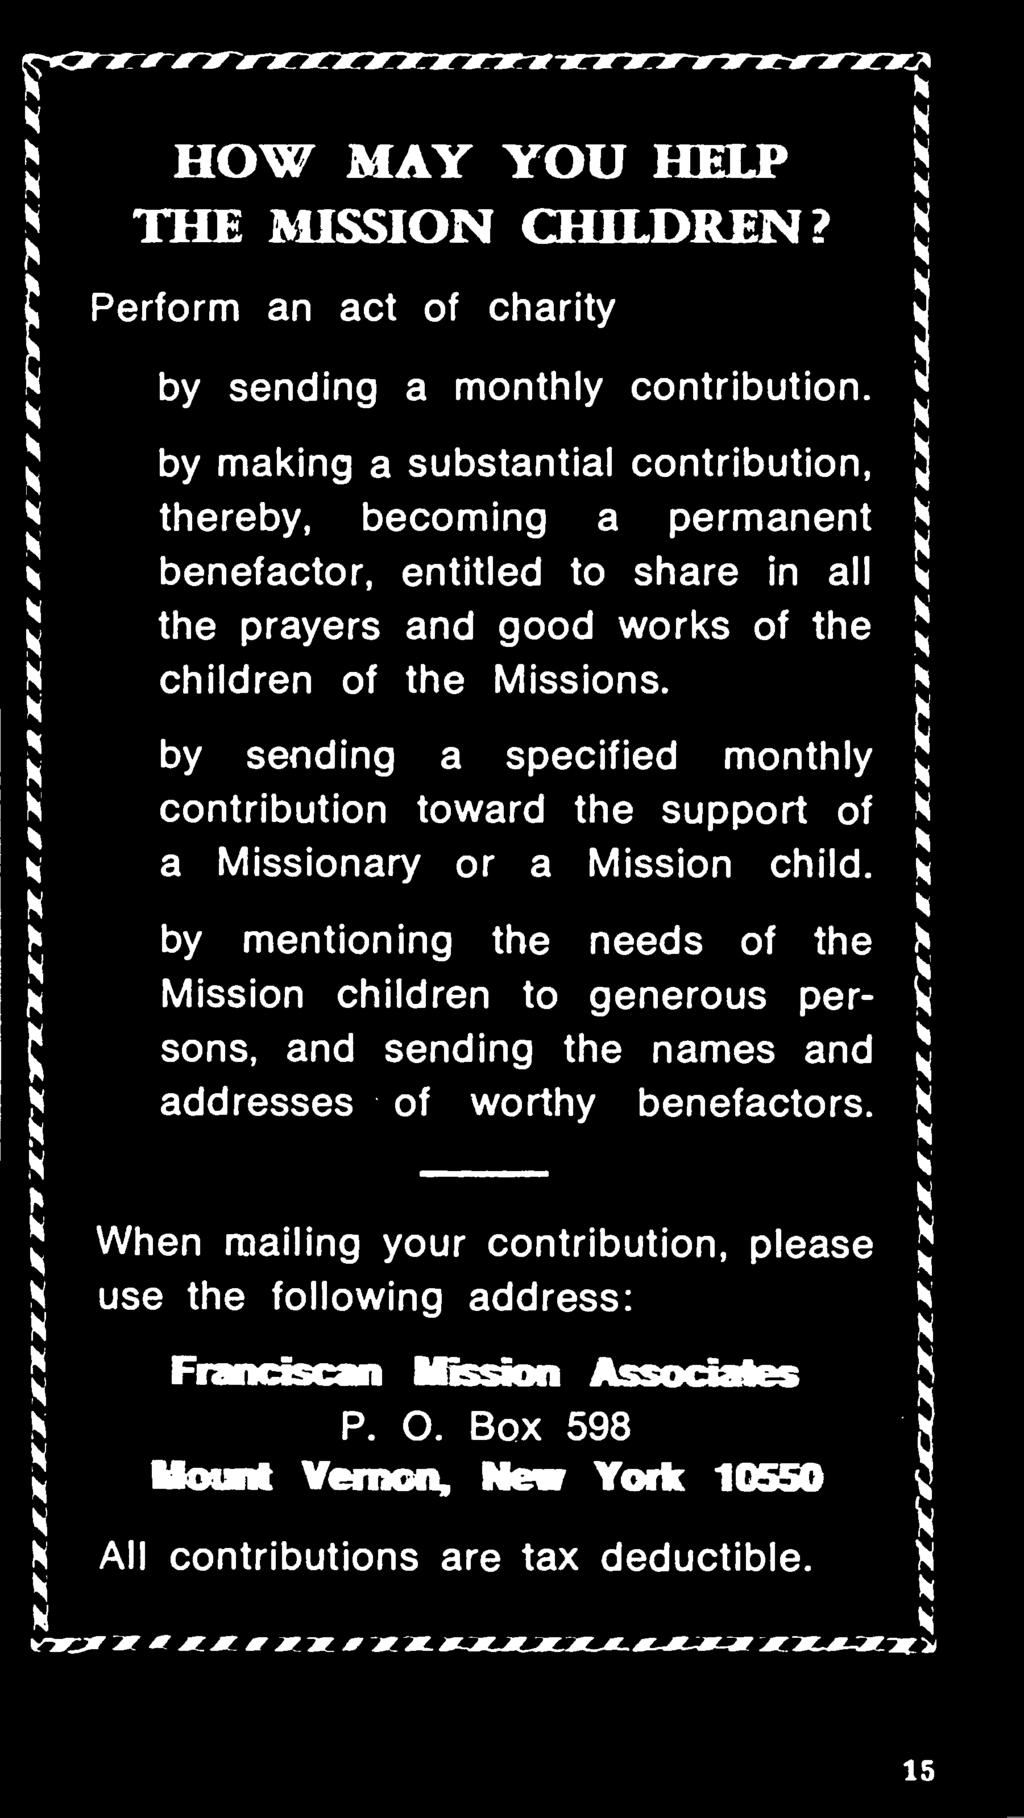 * H by mentioning the needs of the Mission children to generous per- ^ sons, and sending the names and addresses of